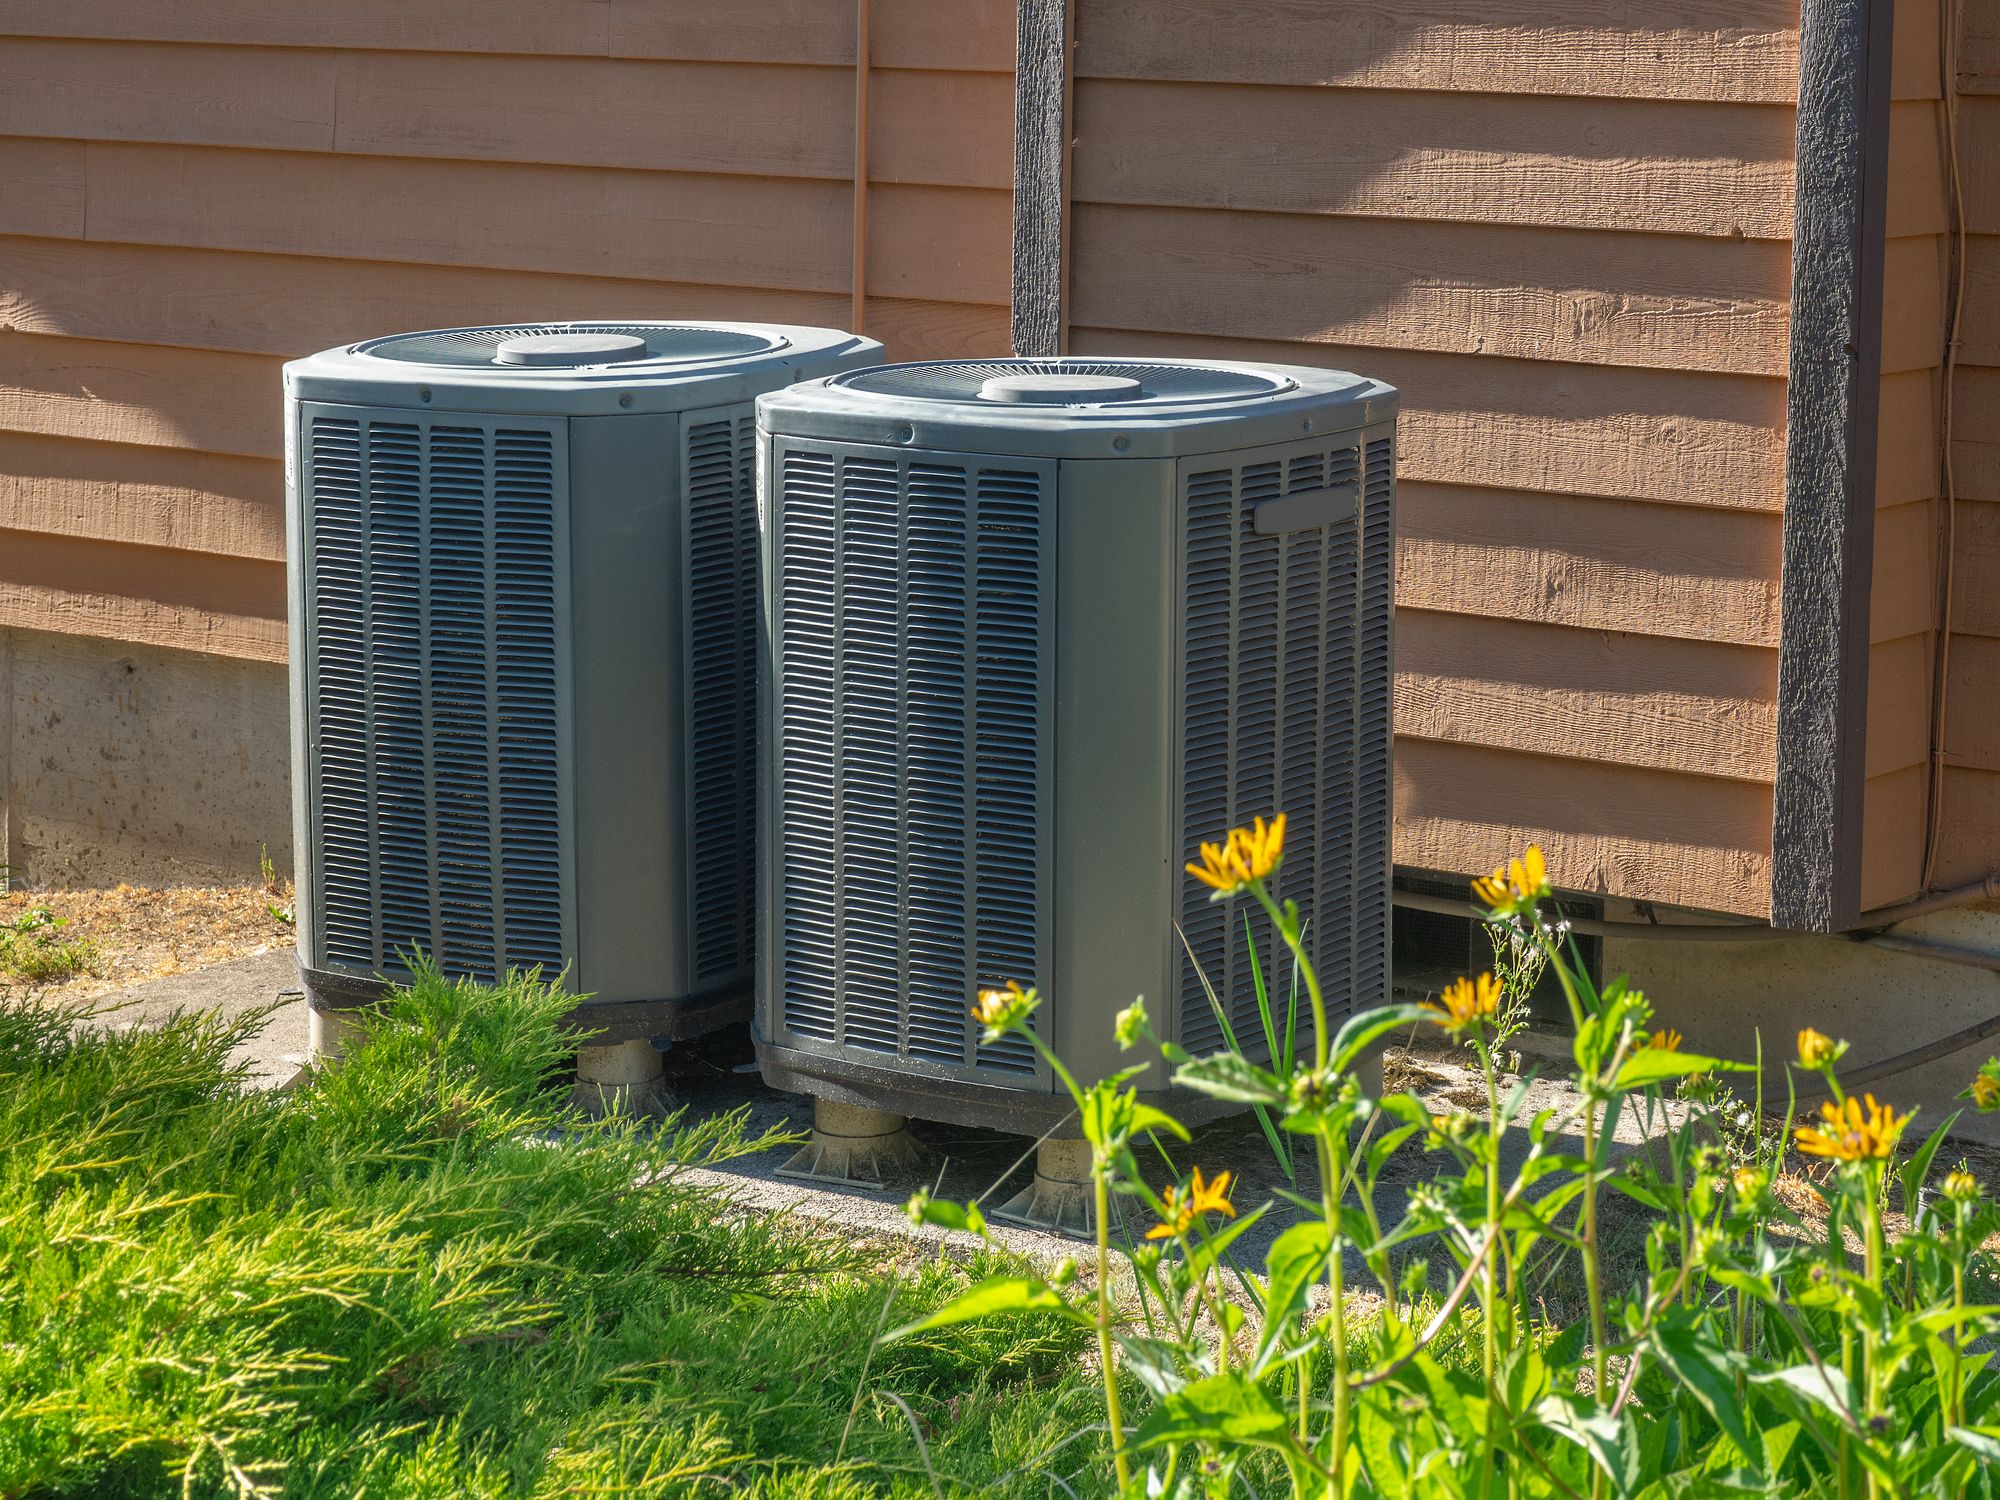 What is HVAC System - What Does HVAC Stand For